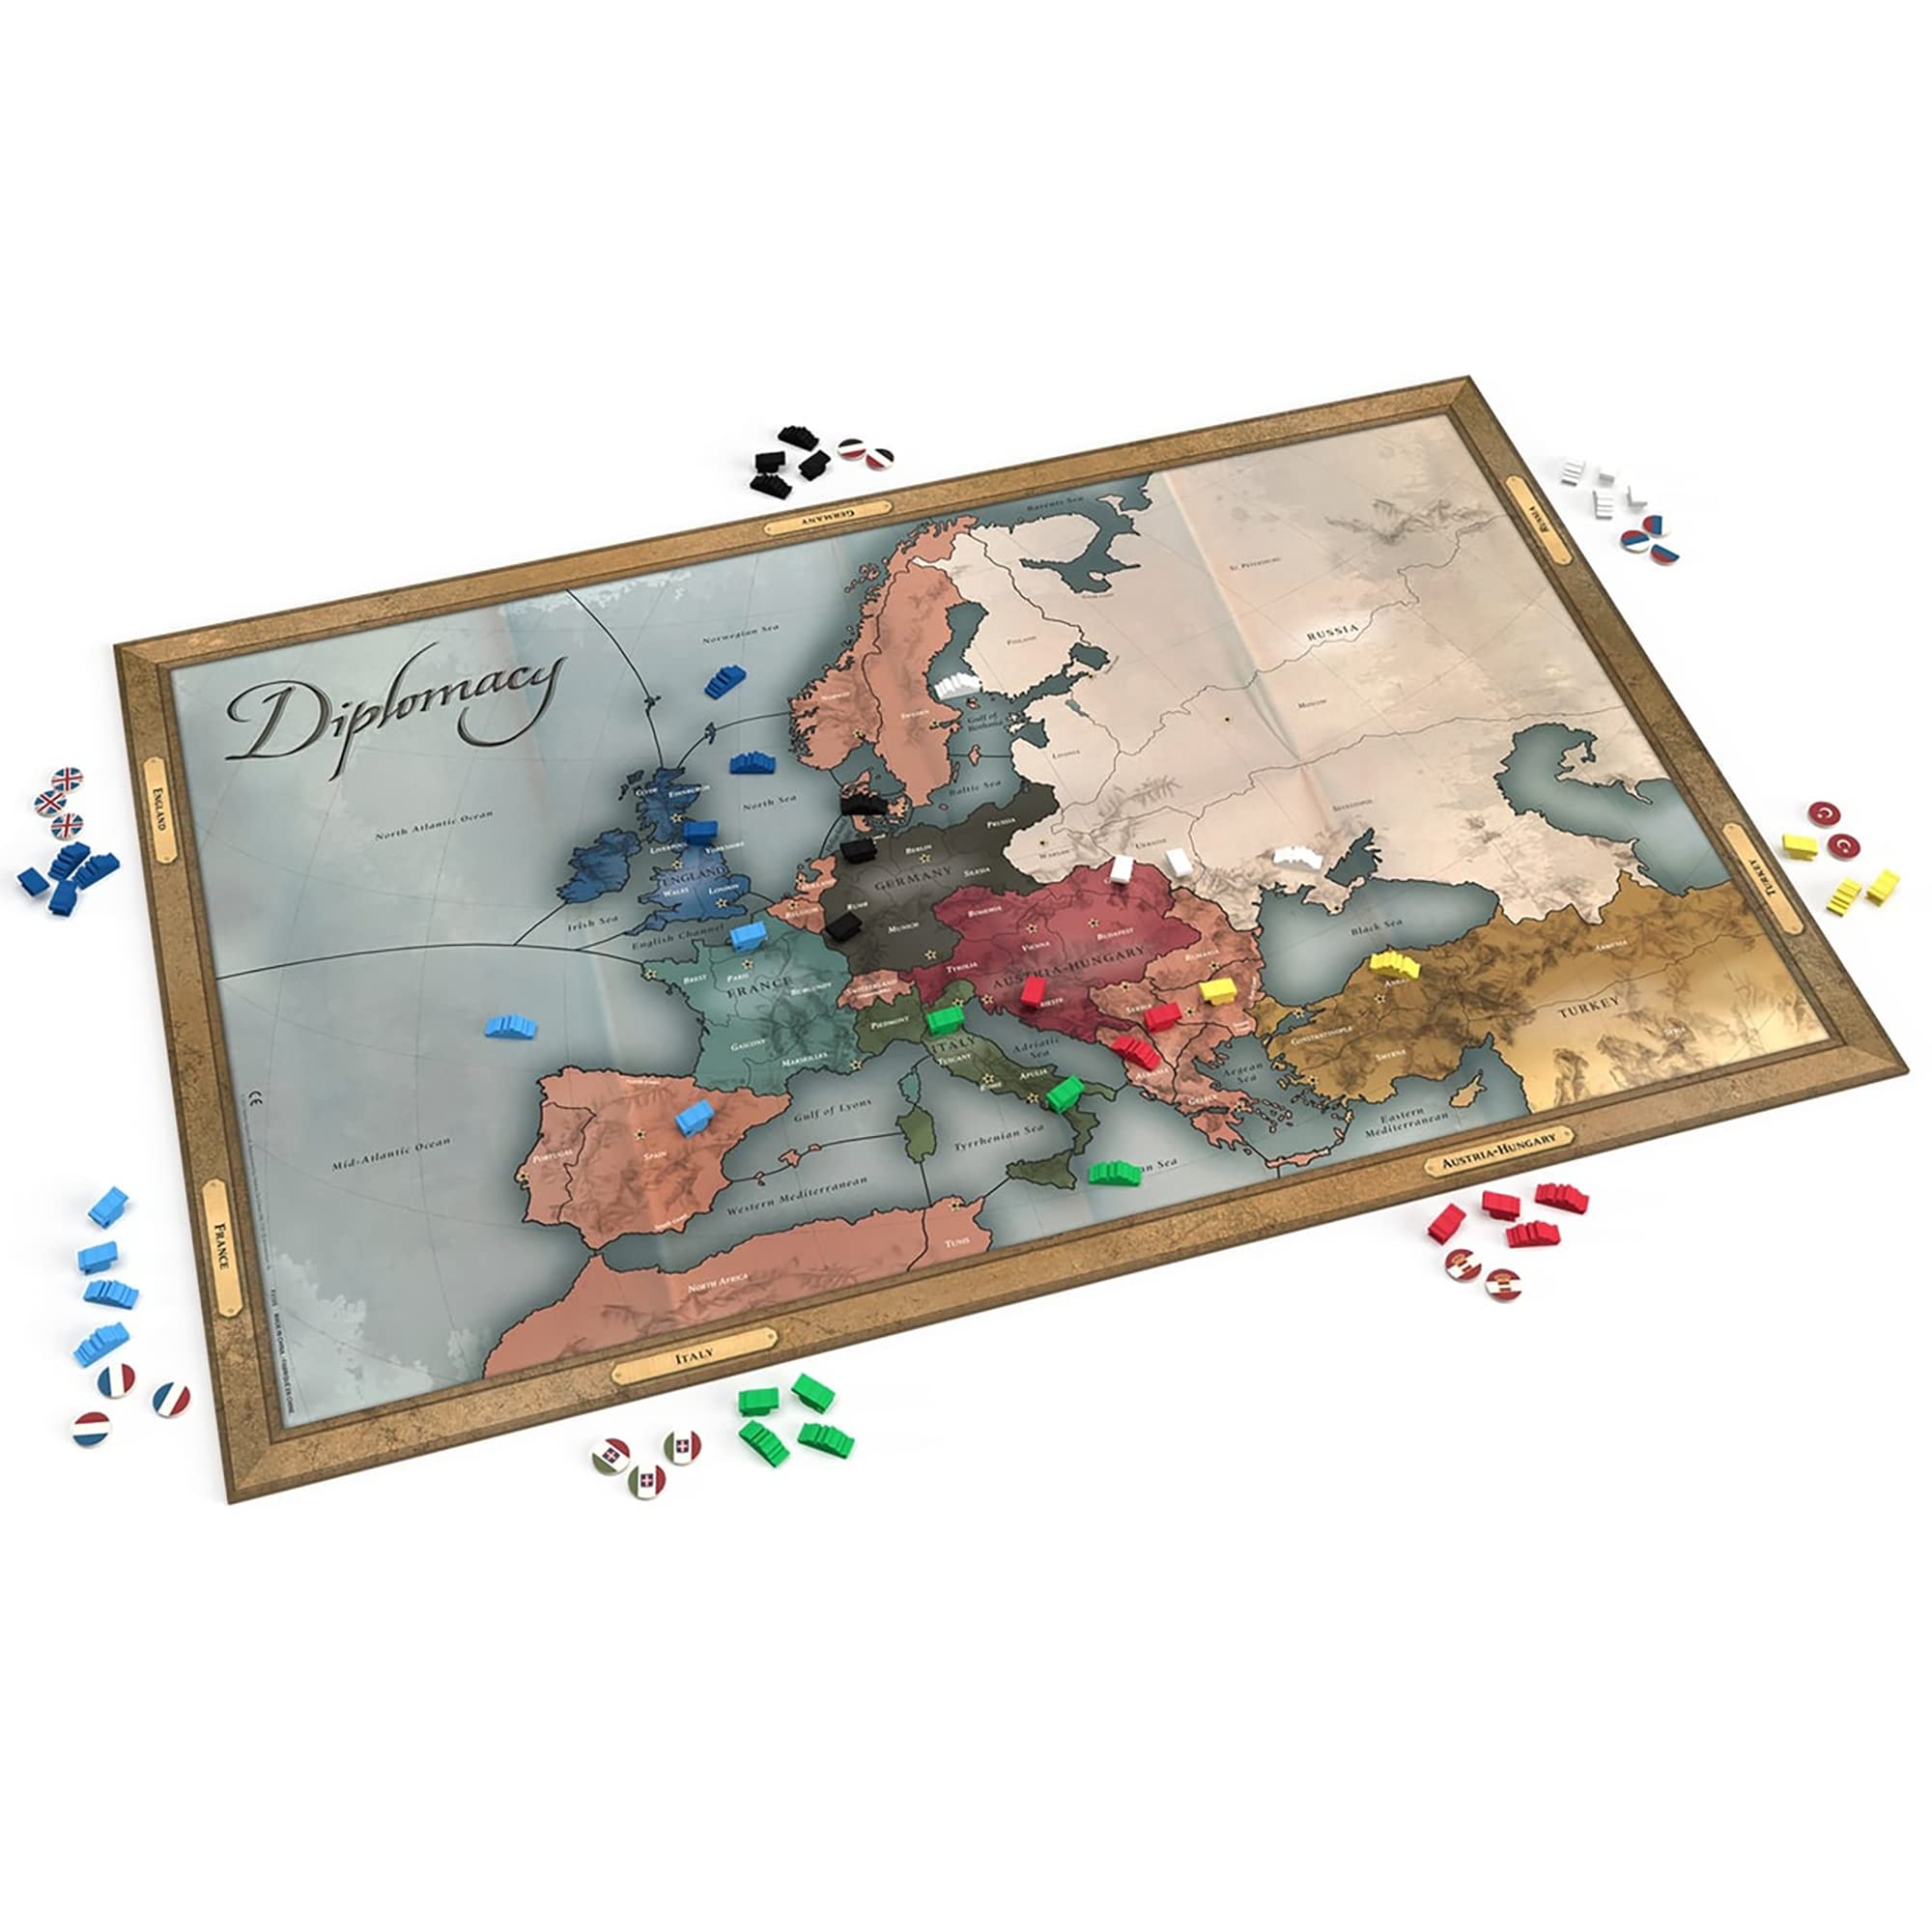 Renegade Game Studios | Diplomacy |Strategy Board Game for 2-7 Players, Ages 12+ with Quick Start Rules